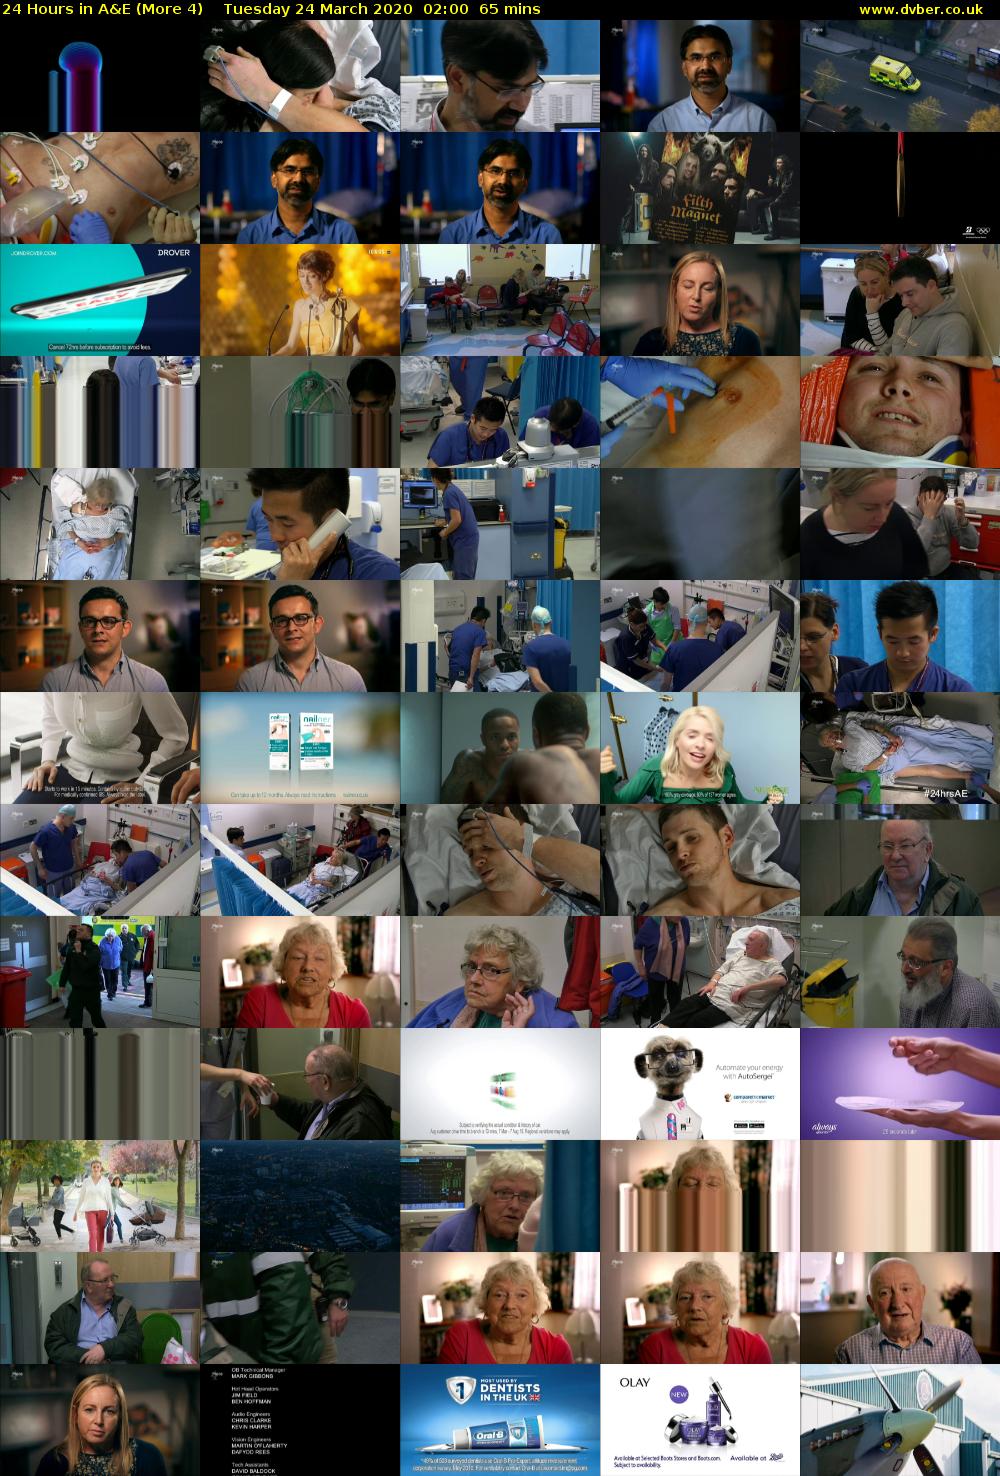 24 Hours in A&E (More 4) Tuesday 24 March 2020 02:00 - 03:05